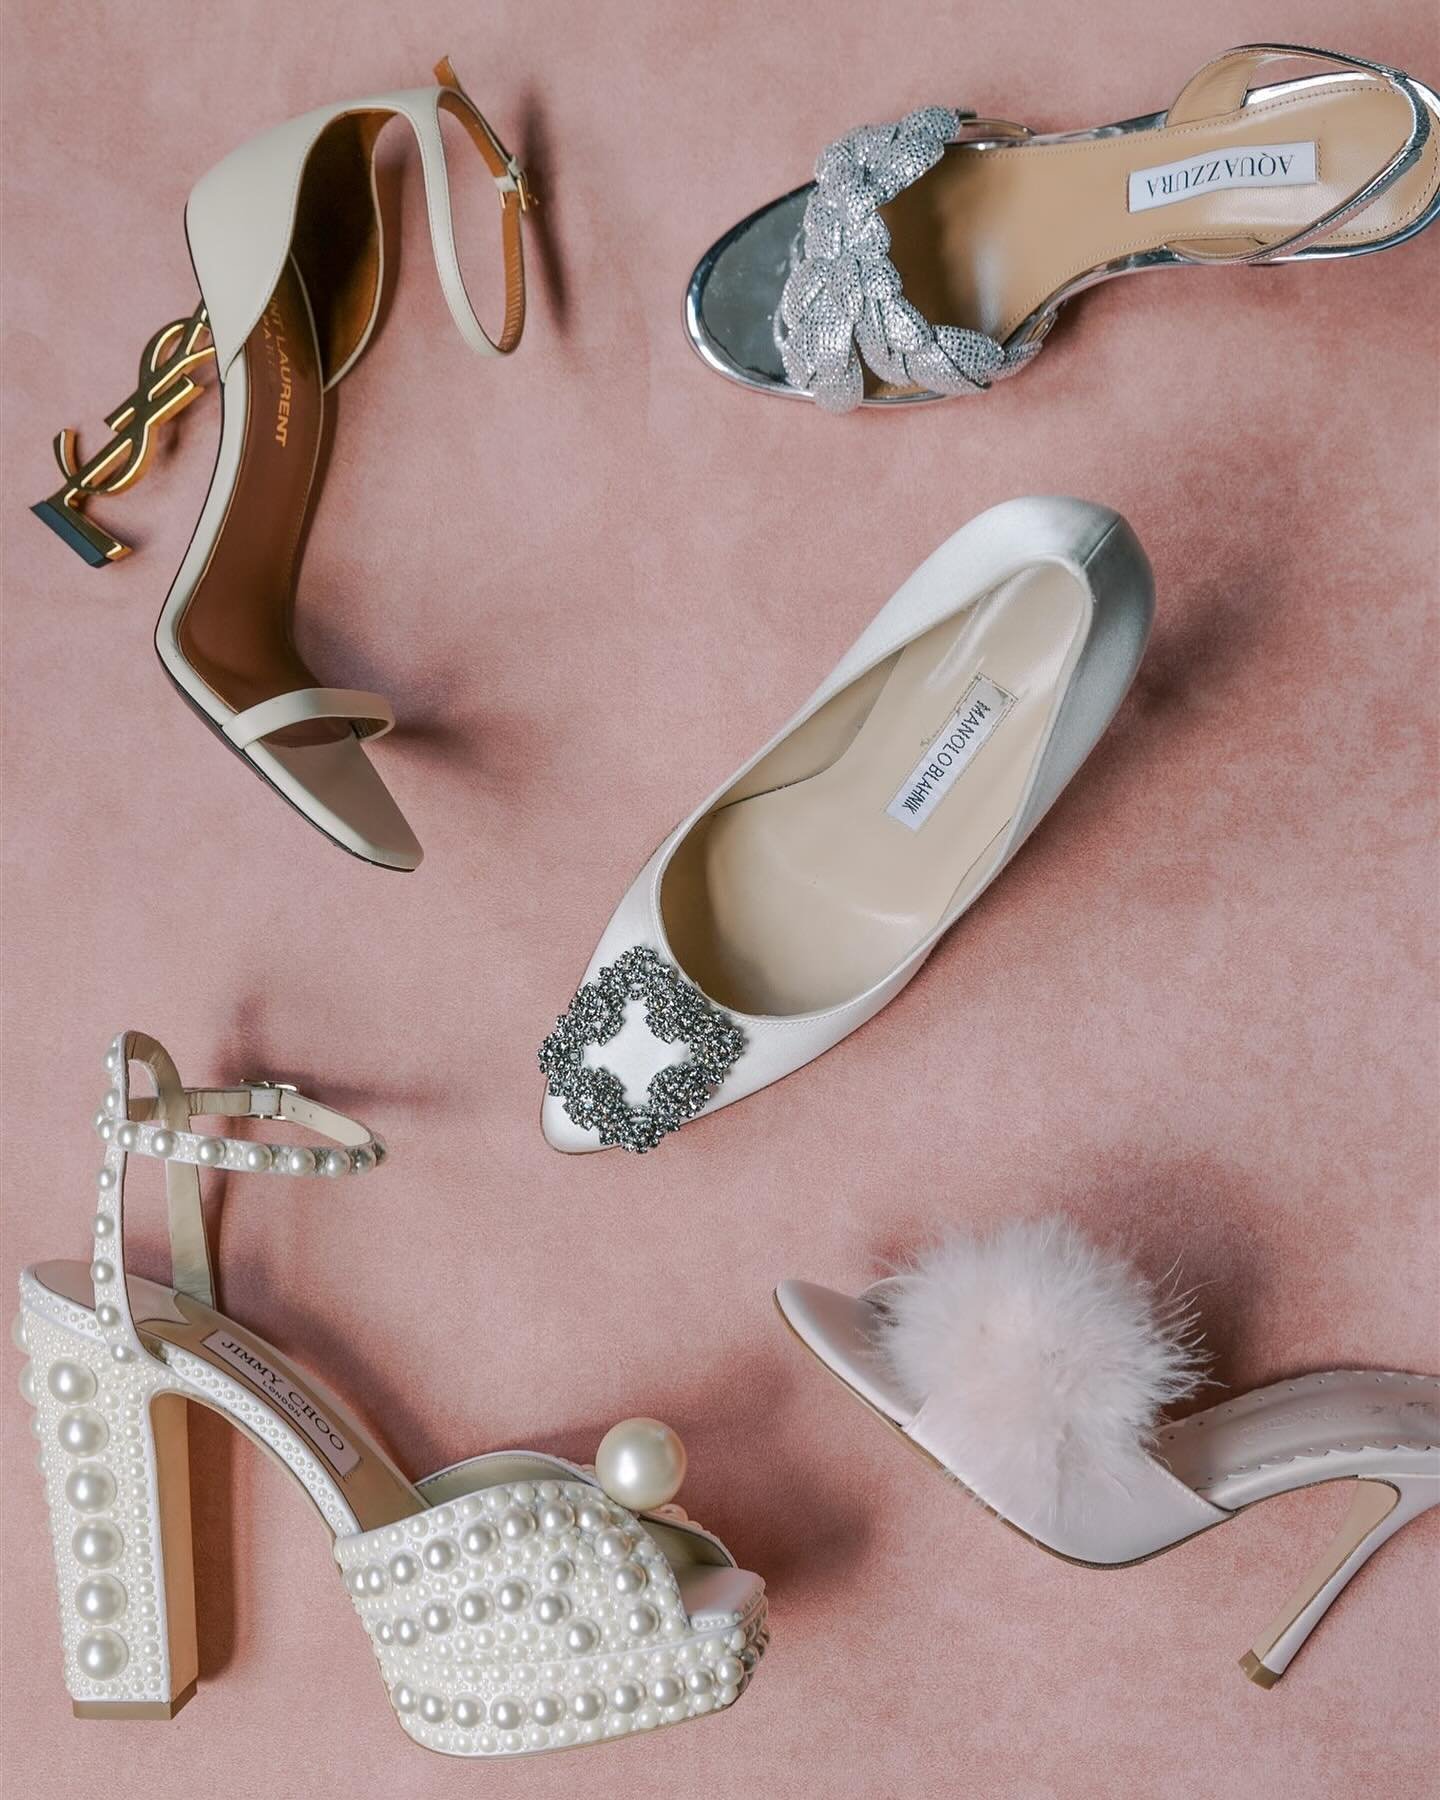 When the bride loves shoes! A girl after my own heart! Annie had the best shoe selection for her wedding weekend looks and we had so much fun photographing them! What is your wedding day shoe style?👠